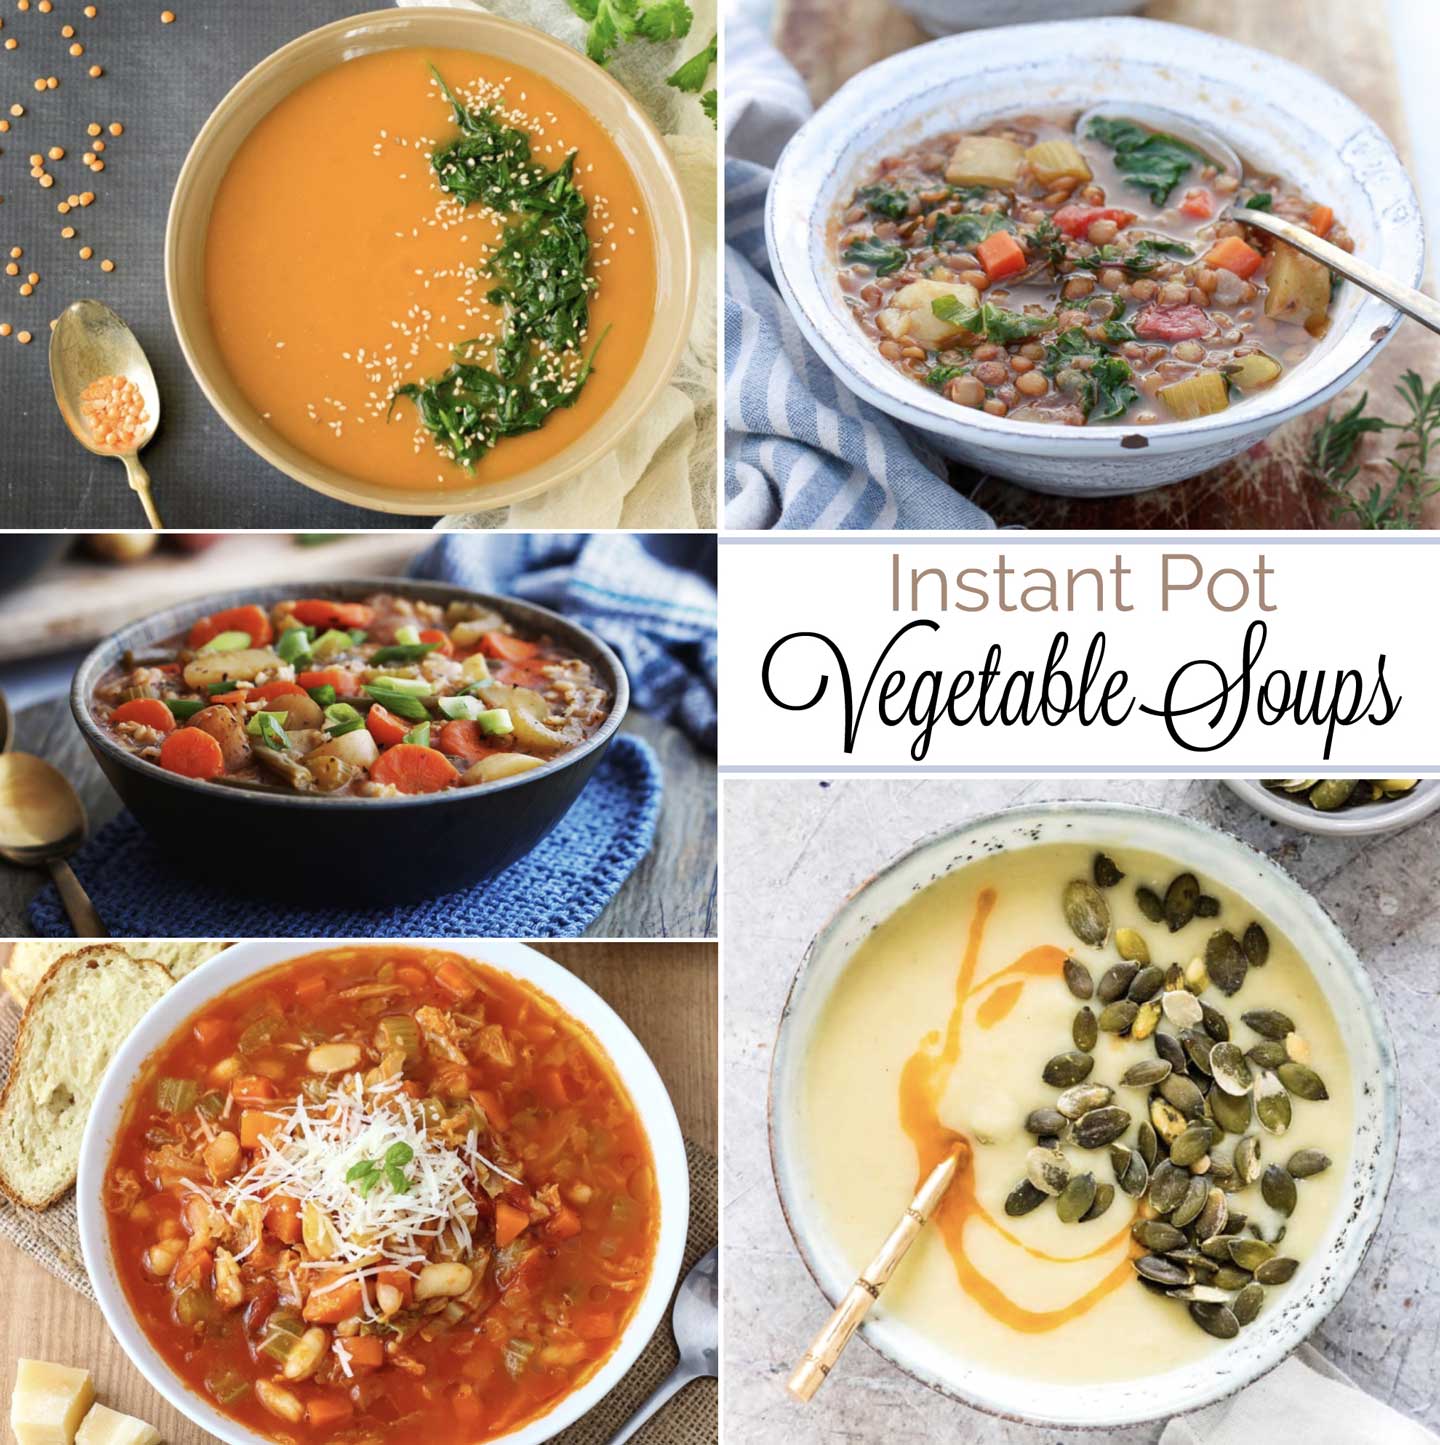 These easy Instant Pot Vegetable Soup recipes are comfort food and its most nutrition-packed! Great for easy dinners on busy nights, or for lazy weekend lunches!